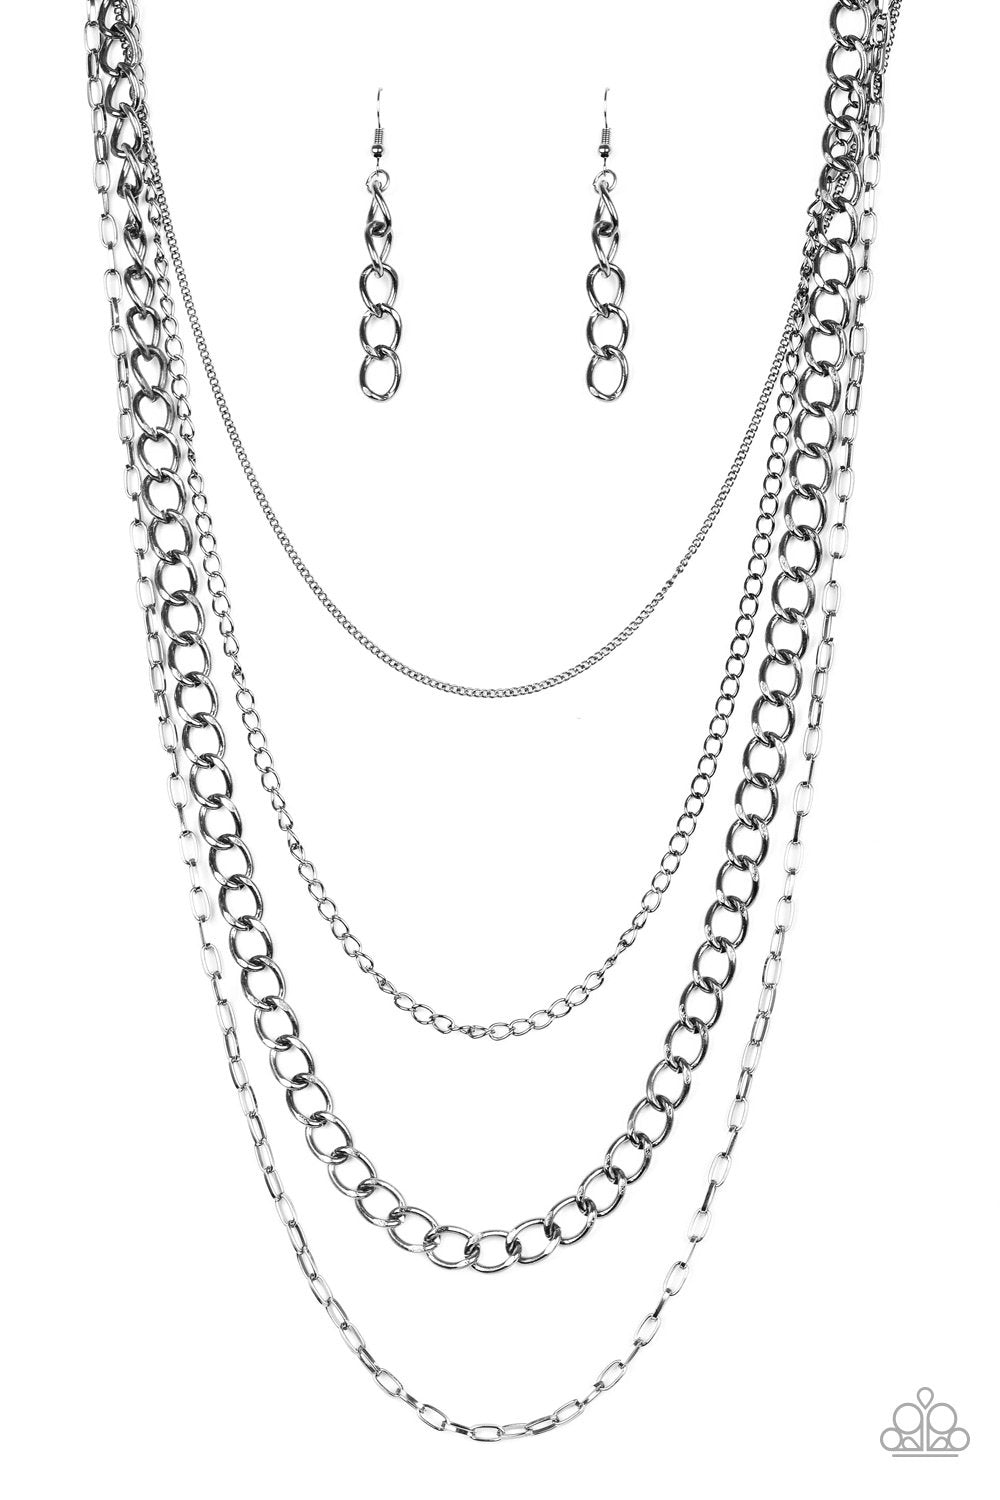 Metro Metal Long Gunmetal Black Chain Necklace - Paparazzi Accessories-CarasShop.com - $5 Jewelry by Cara Jewels